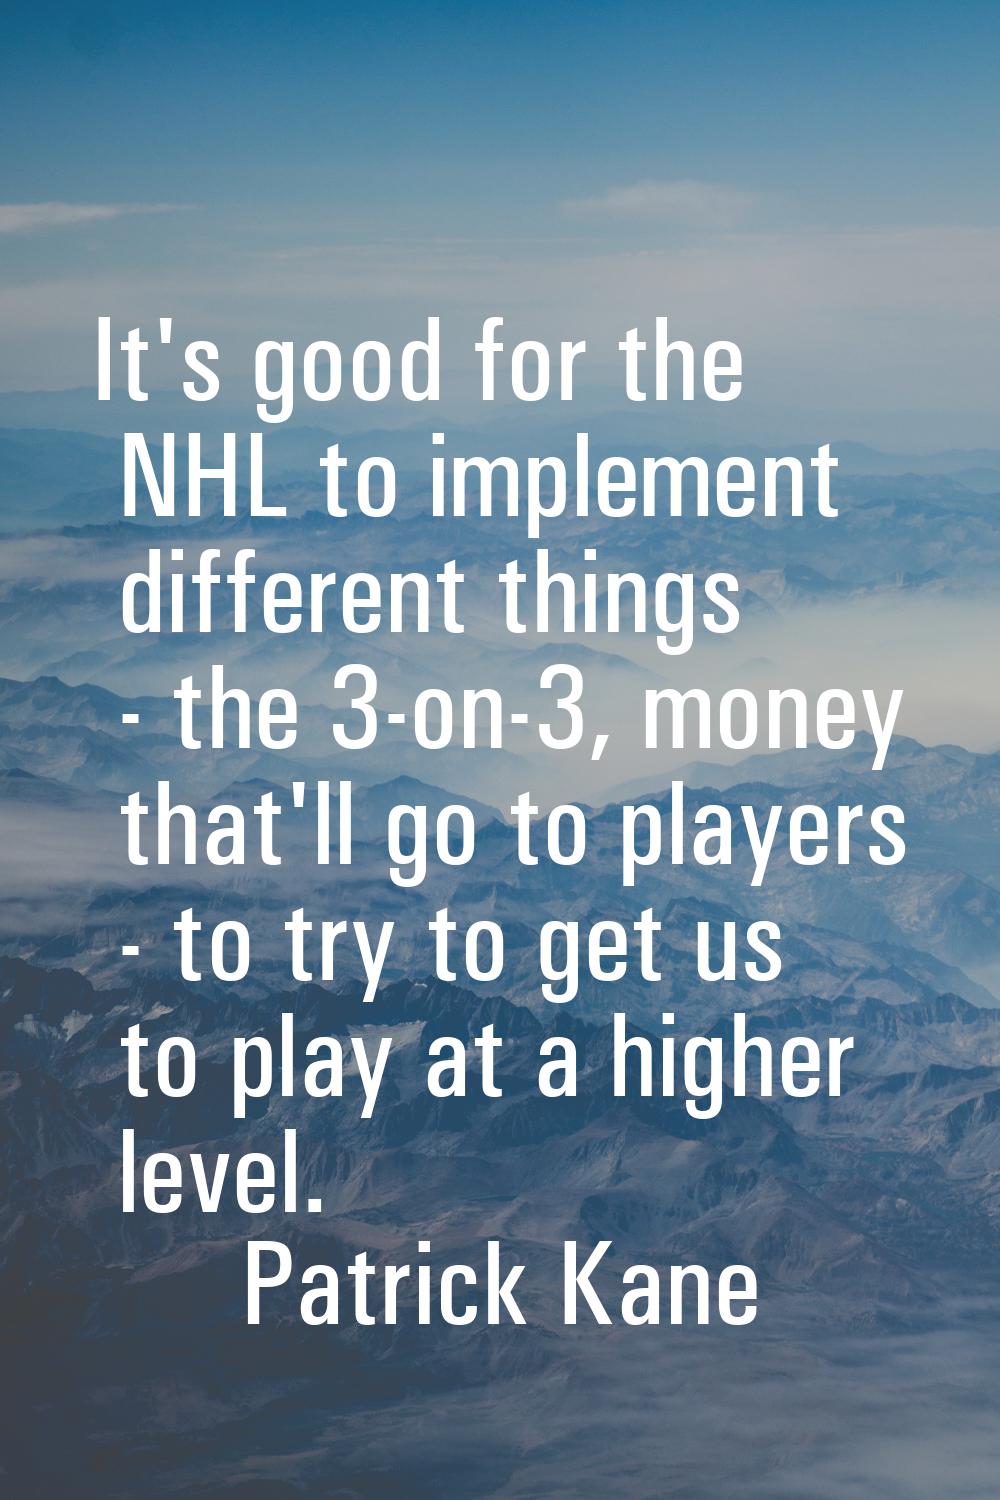 It's good for the NHL to implement different things - the 3-on-3, money that'll go to players - to 